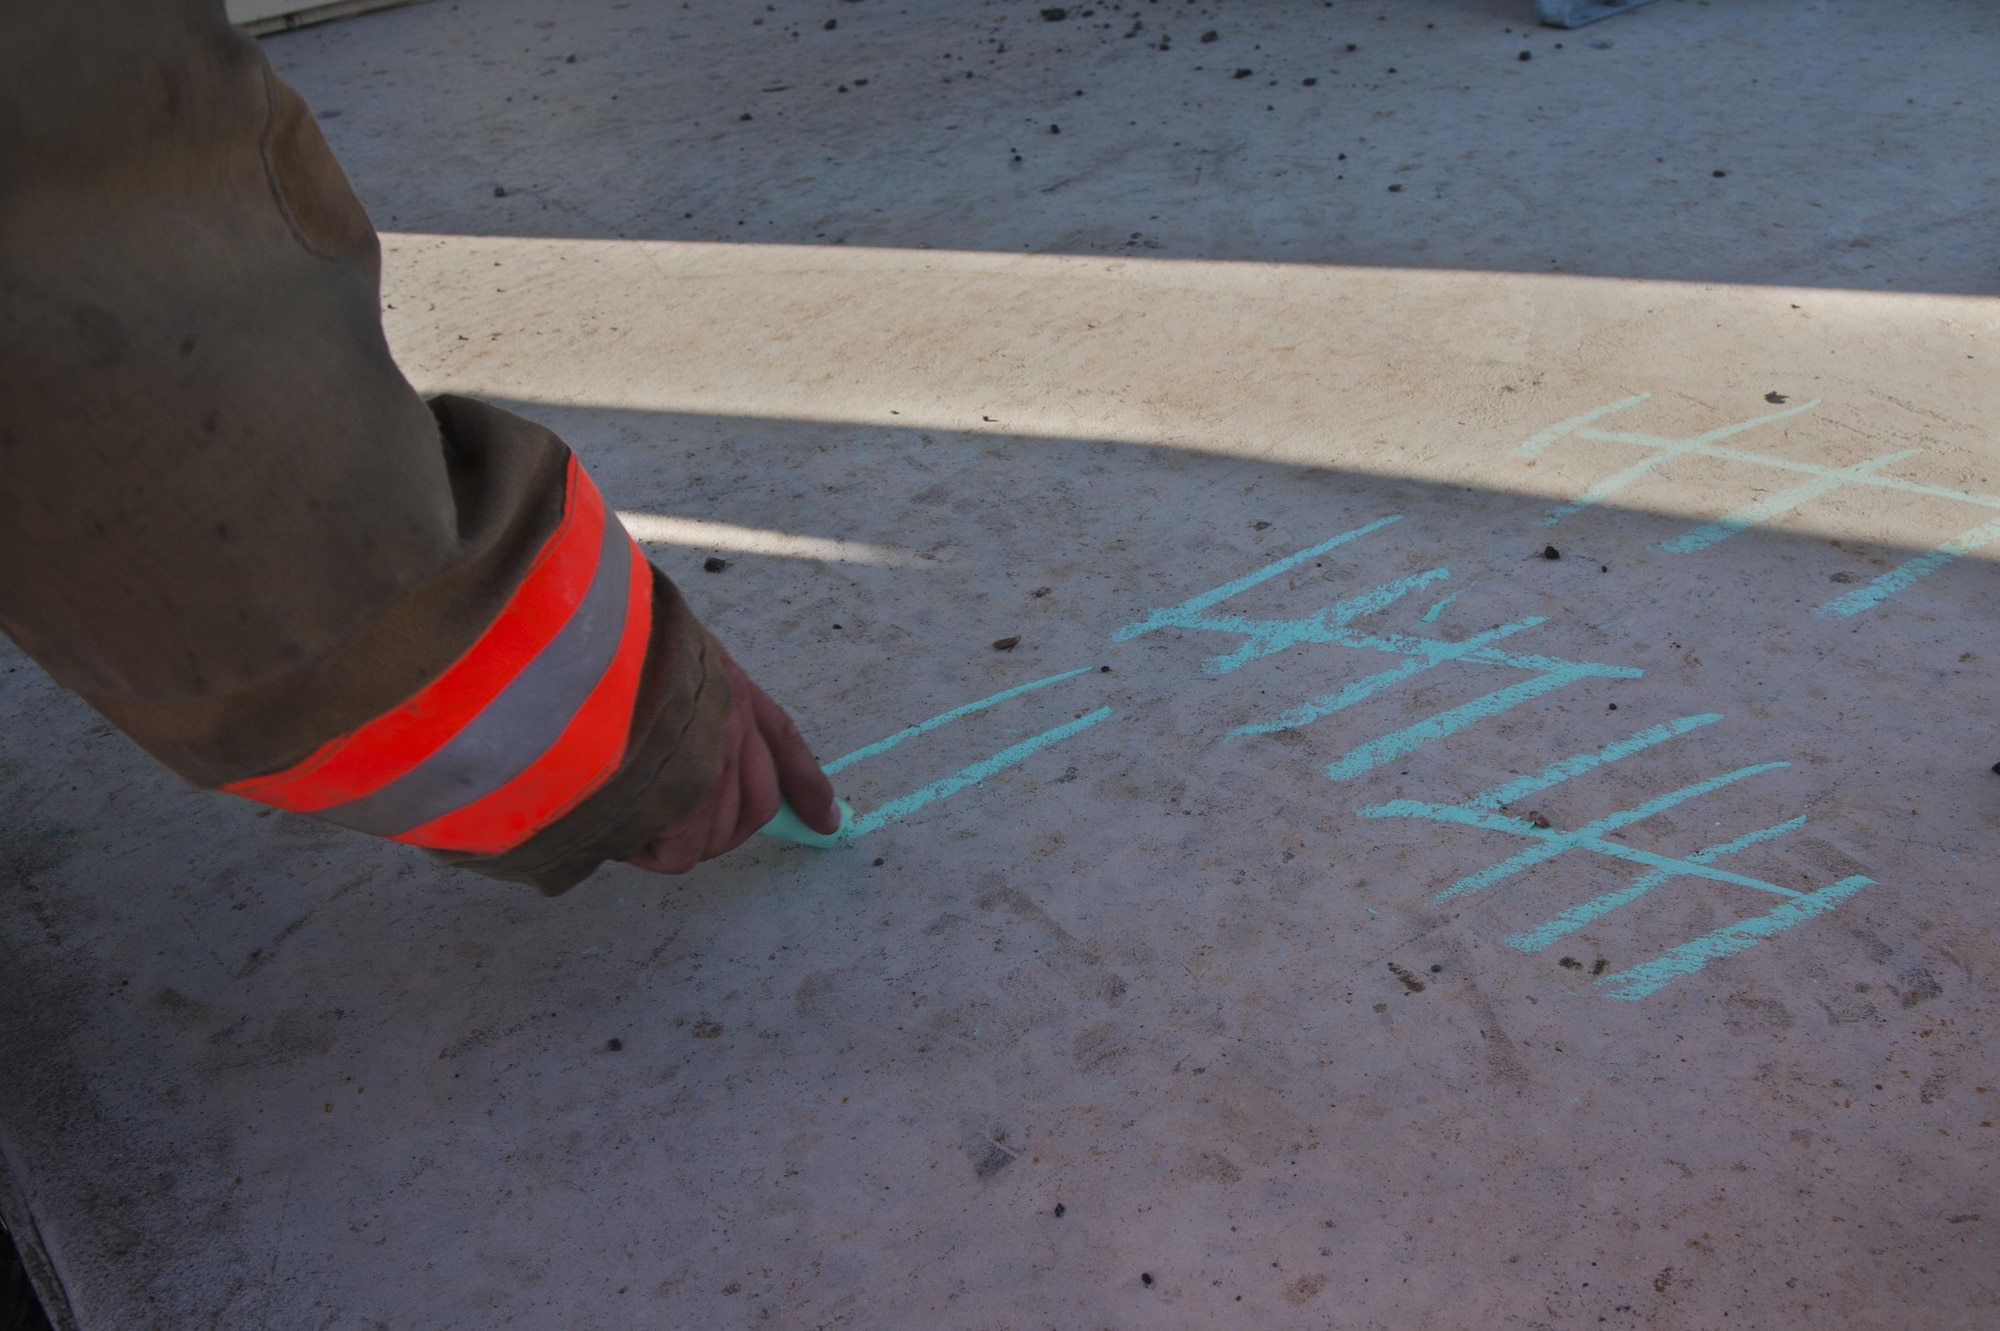 Senior Airman, Nickolas Torrez, 5th Civil Engineer Squadron firefighter, marks the number of flights he and other firefighters climbed during their 9/11 memorial climb at Minot Air Force Base, N.D., Sept. 11, 2016. The memorial not only paid tribute to the 343 firefighters who lost their lives, but also honored other first responders and innocent bystanders who were affected by the attack. (U.S. Air Force photo/Airman 1st Class Christian Sullivan)